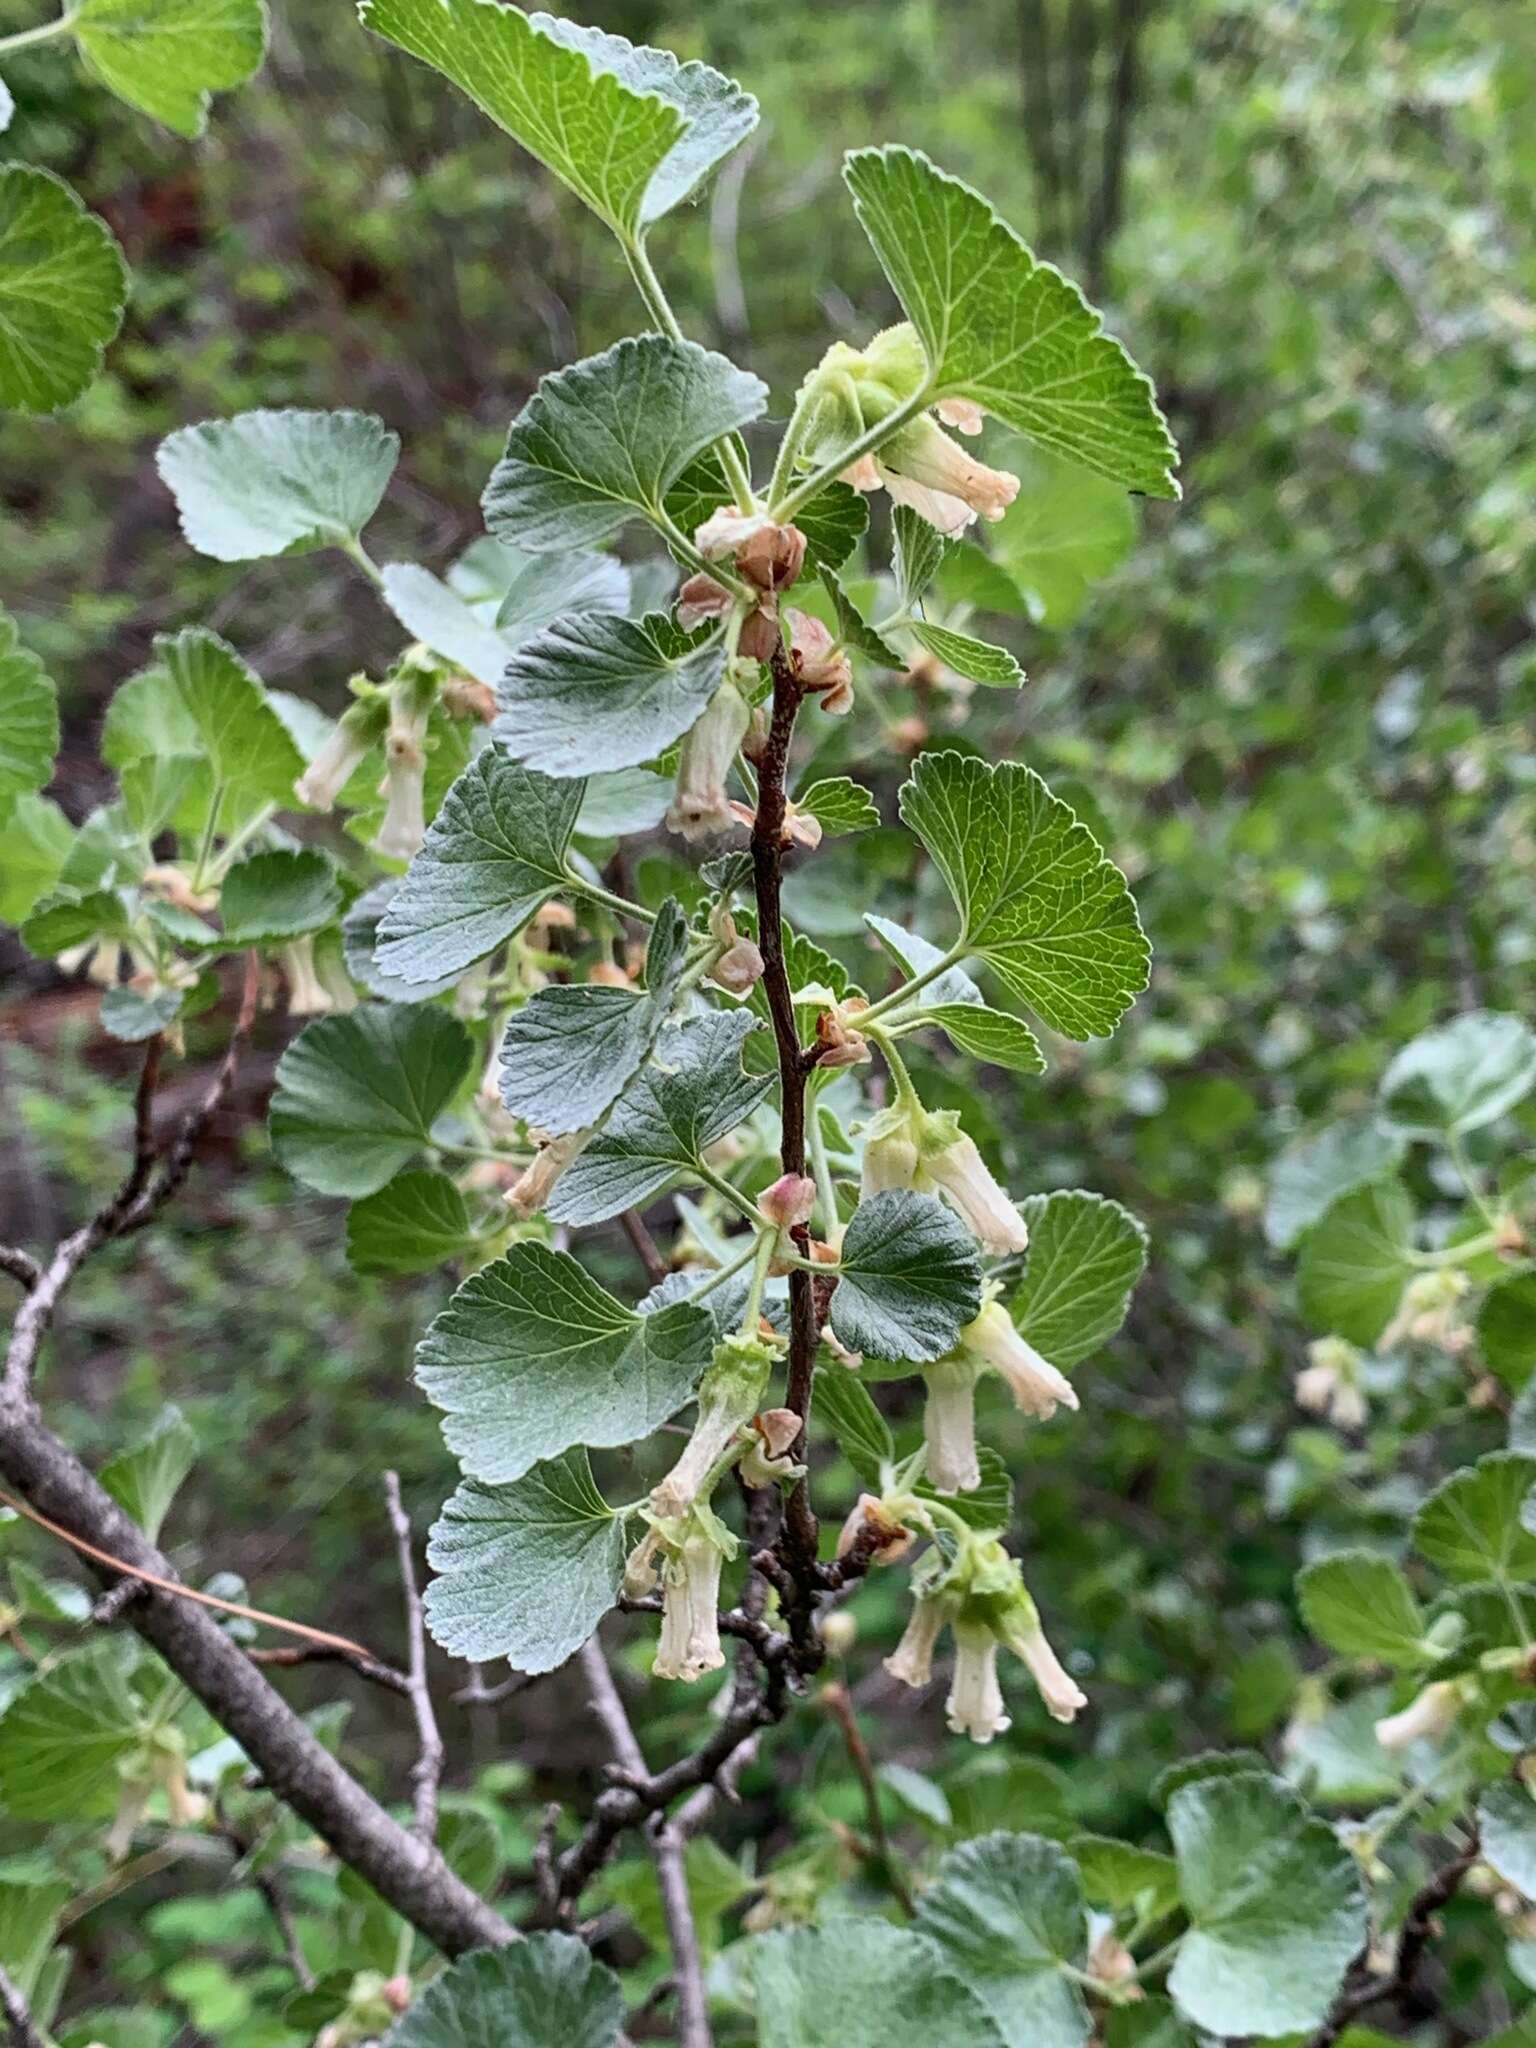 Image of whisky currant